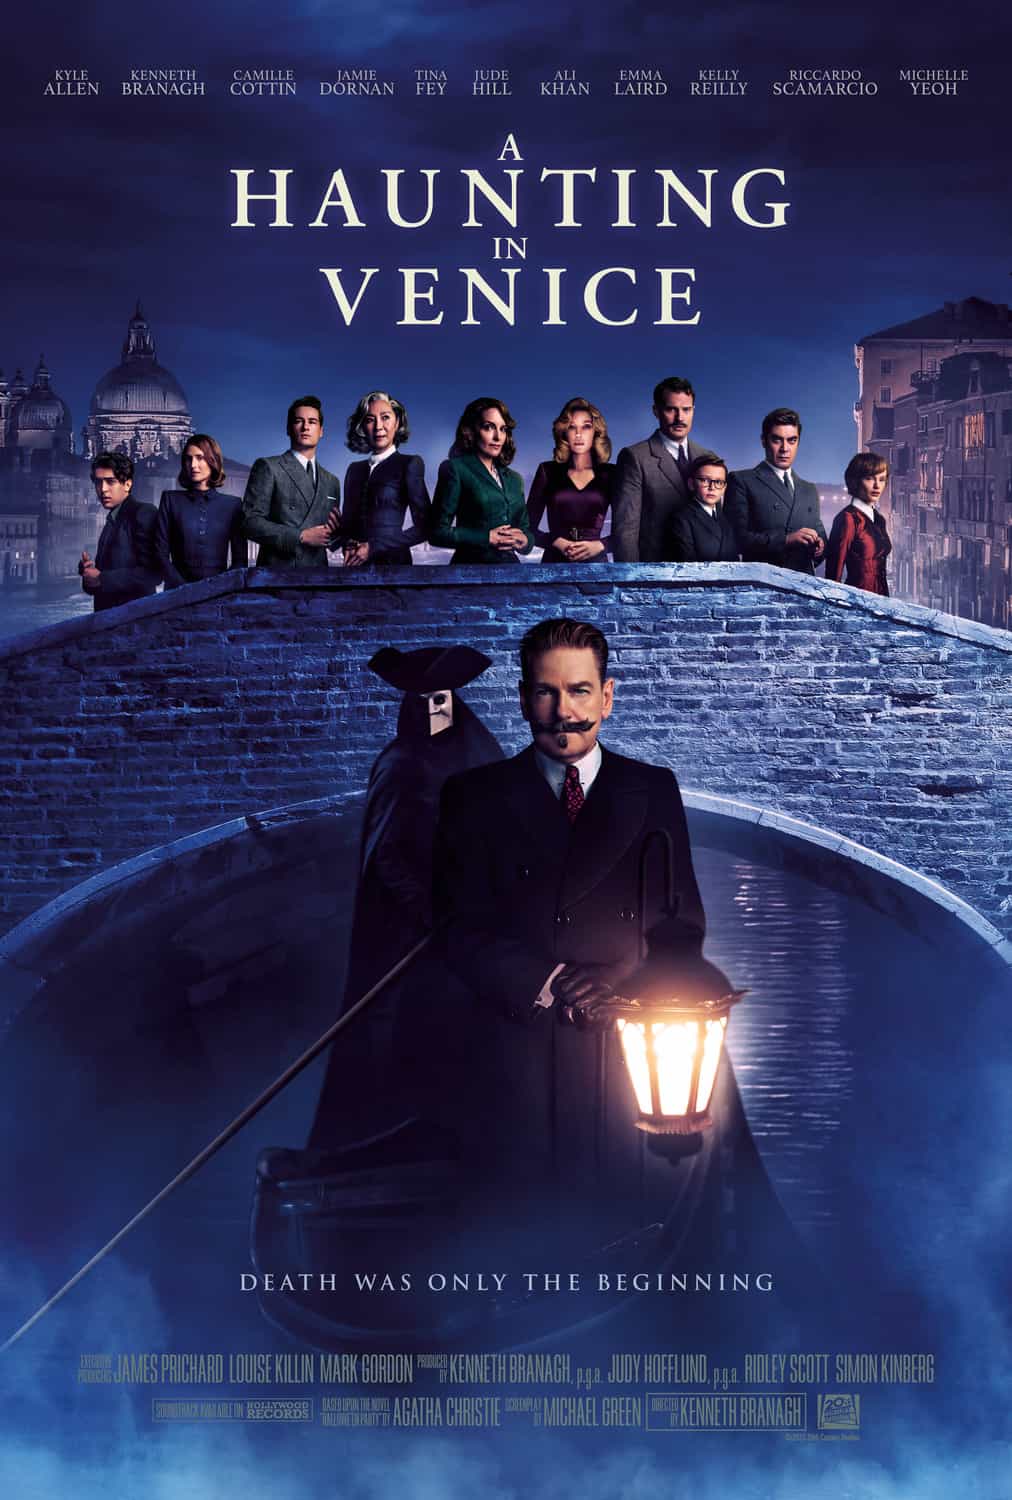 UK Box Office Weekend Report 15th - 17th September 2023:  A Haunting In Venice is the highest new movie of the weekend removing The Nun II from the top after a week